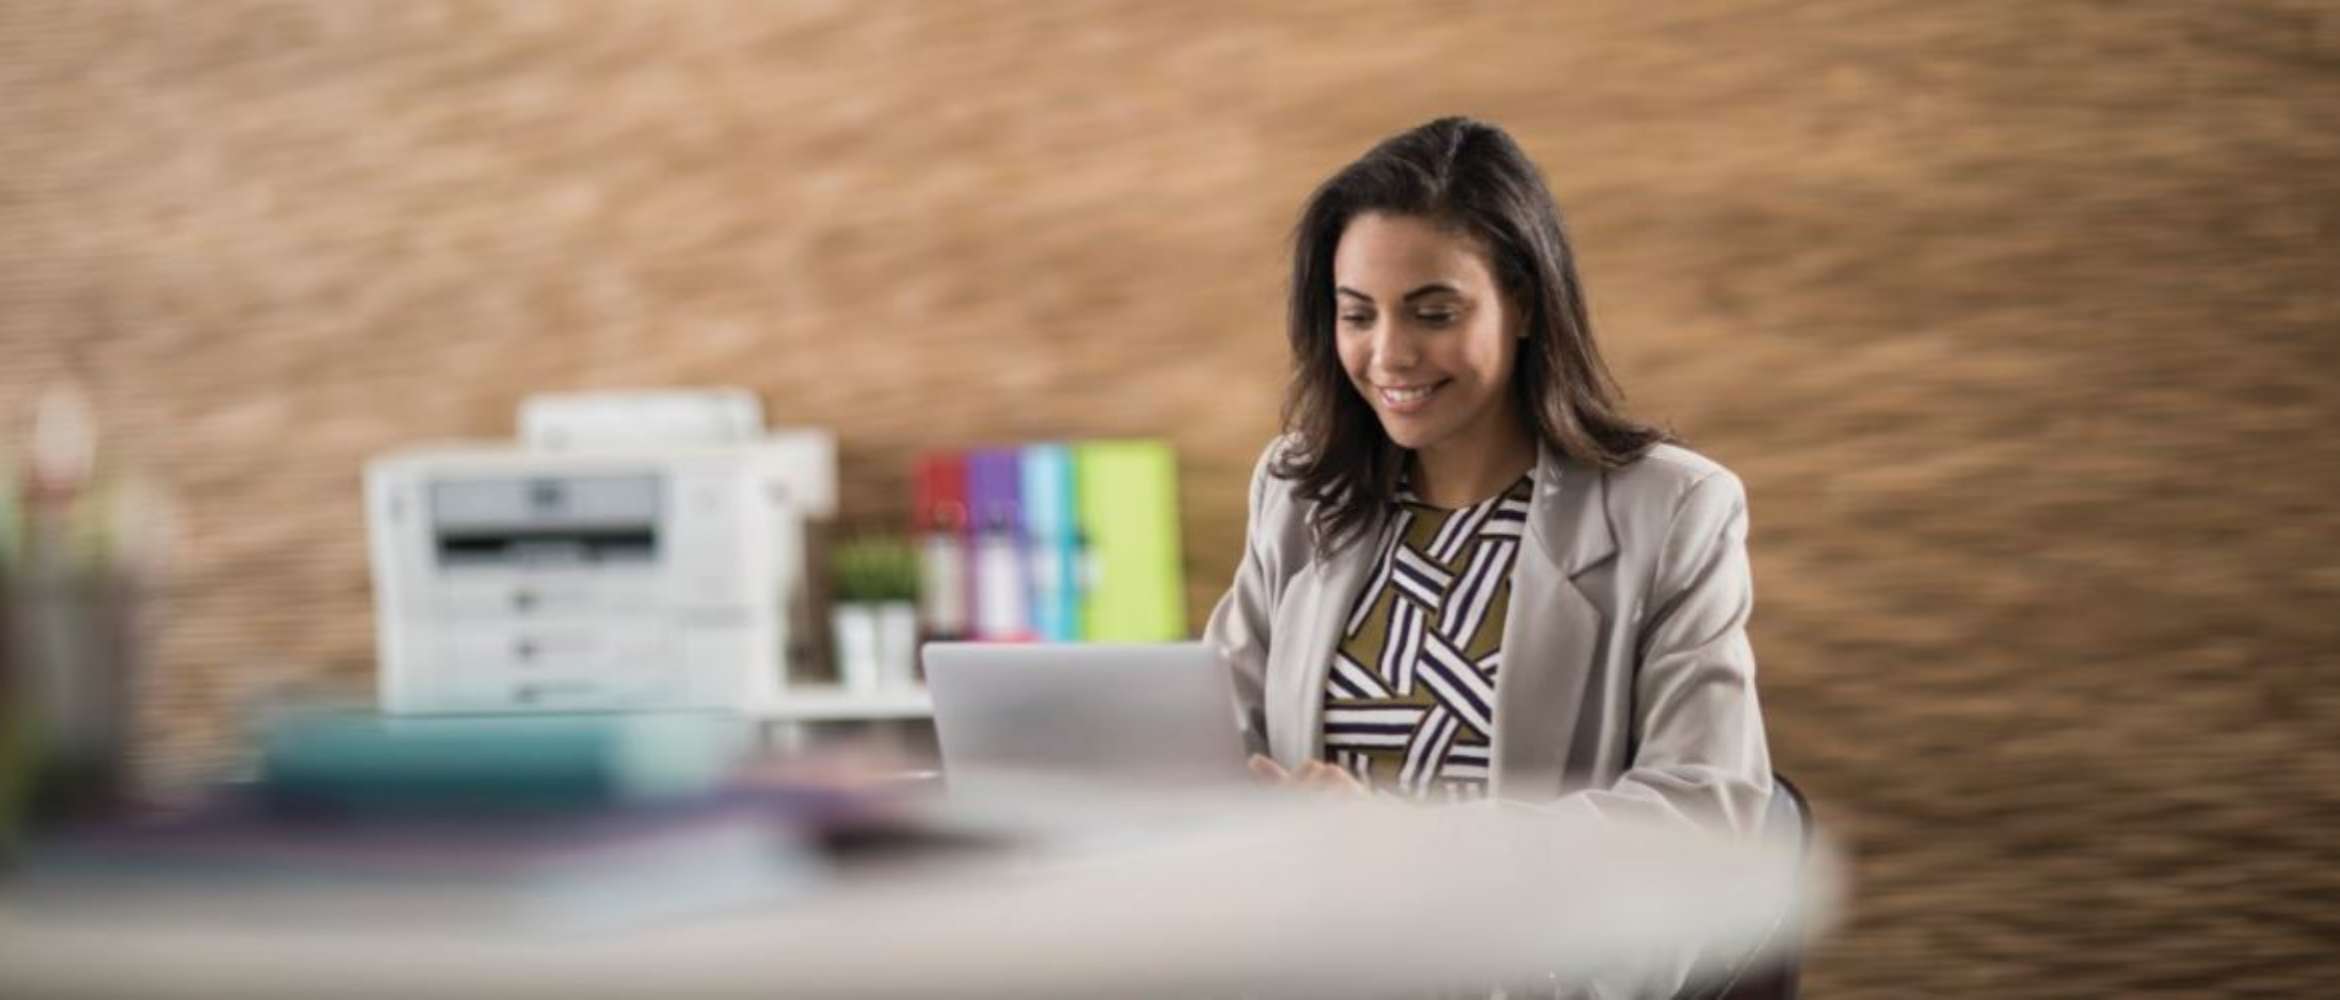 A female business worker in smart casual attire is sat working from a laptop a home office or small business scenario with a Brother multi-function SMB printer in the background